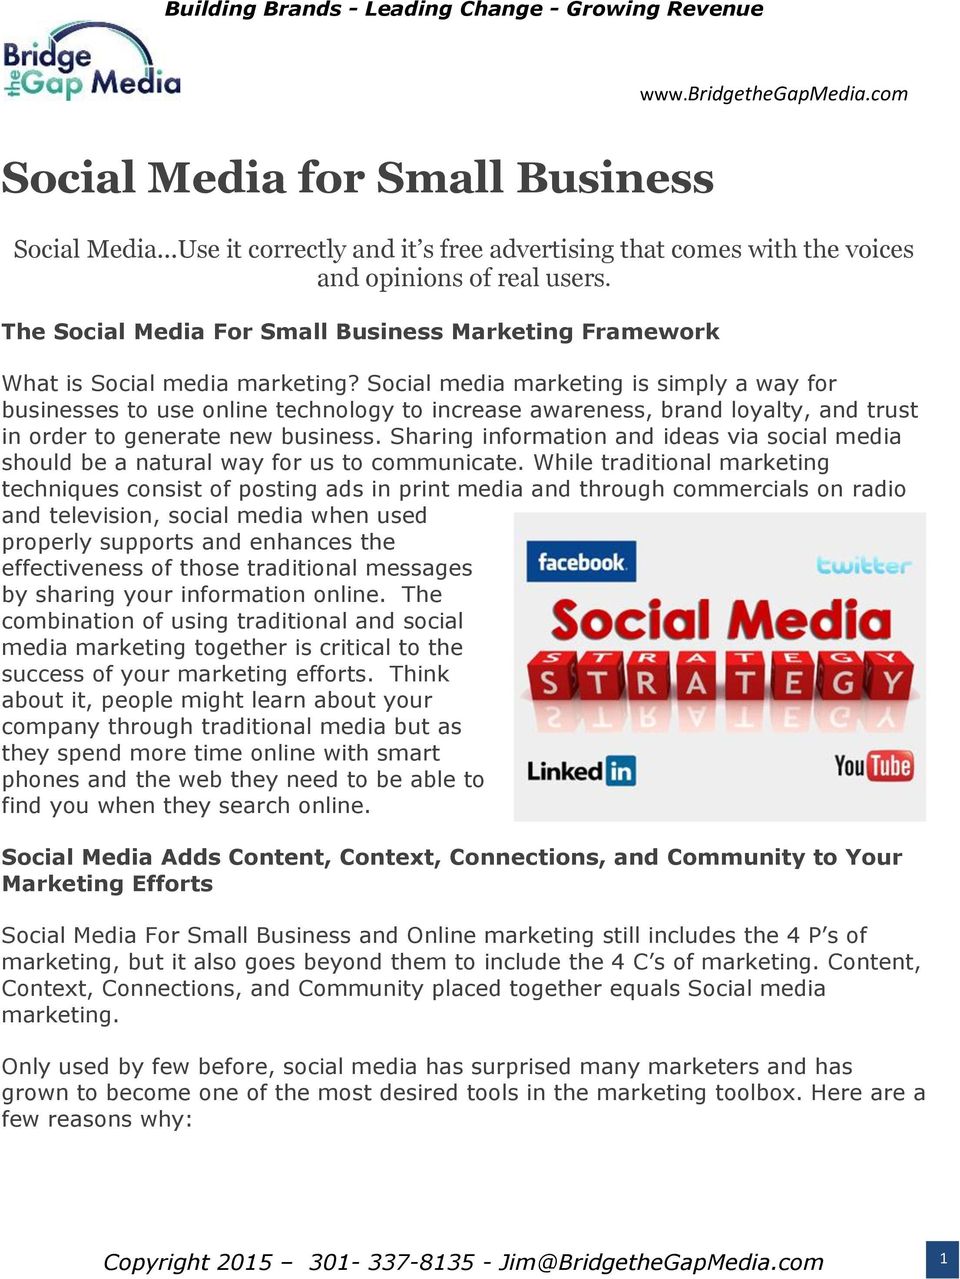 Social media marketing is simply a way for businesses to use online technology to increase awareness, brand loyalty, and trust in order to generate new business.